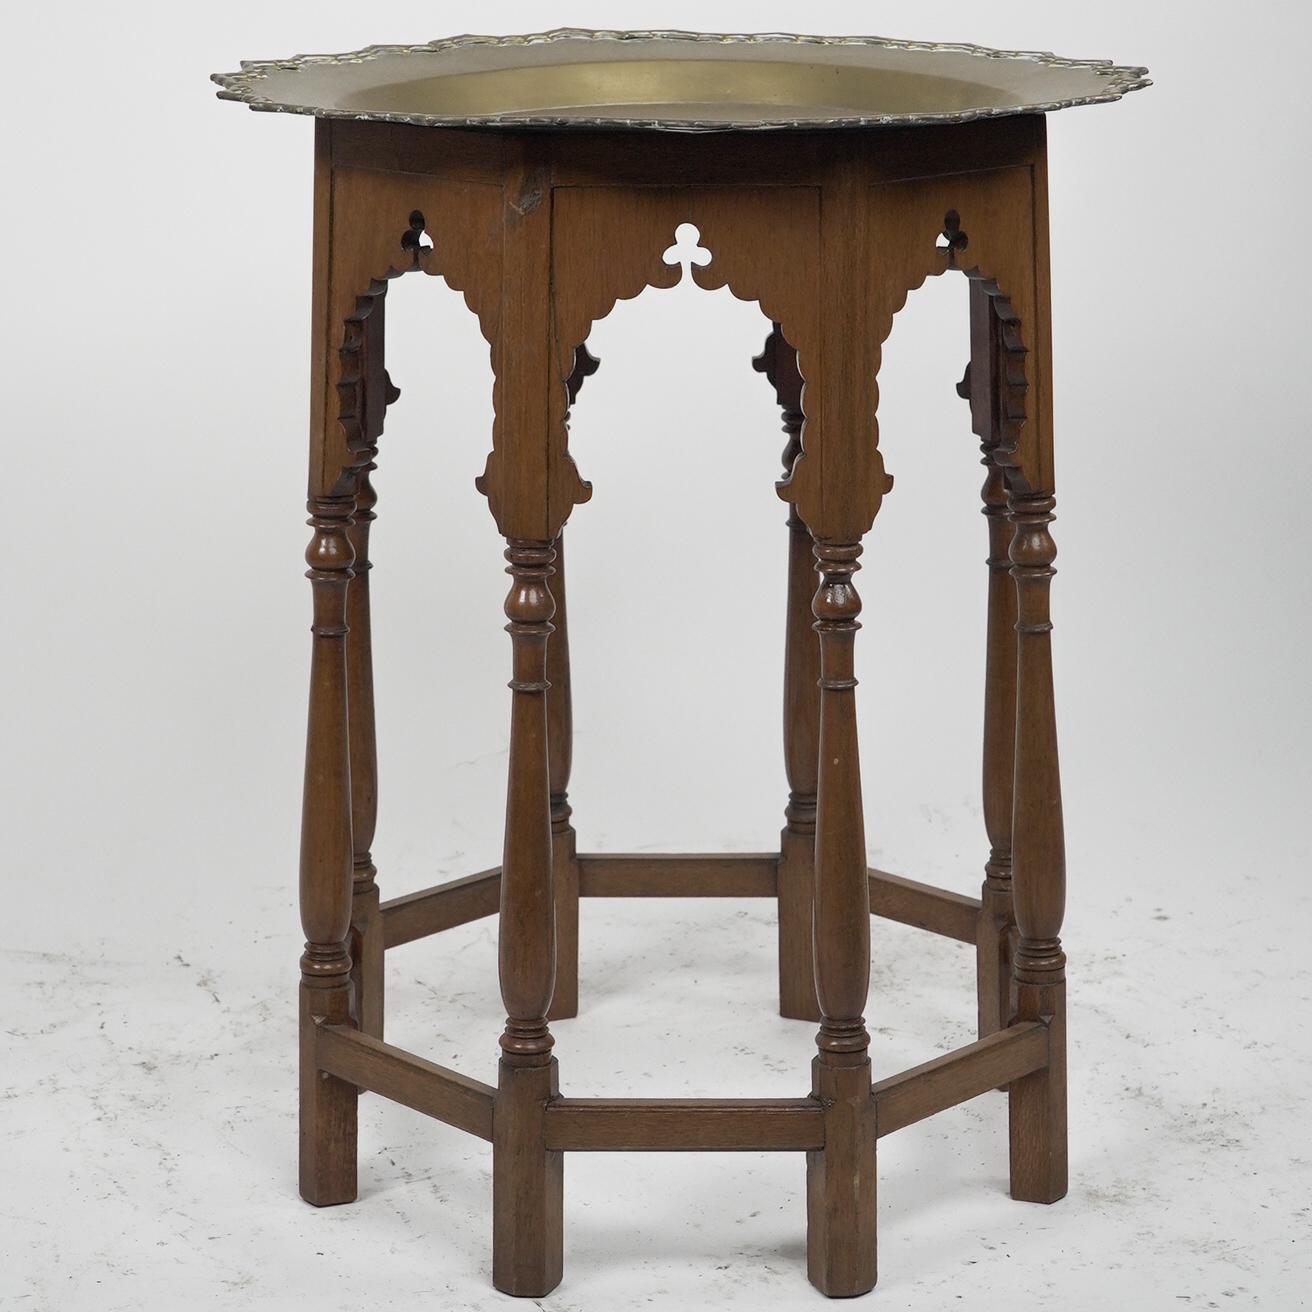 Liberty & Co style. 
A Moorish-style side table with a heavy brass removable dish-shaped table top, richly engraved with floral decoration to the wavy edge and a bird of paradise to the centre, with Moorish arched aprons on six turned legs united by